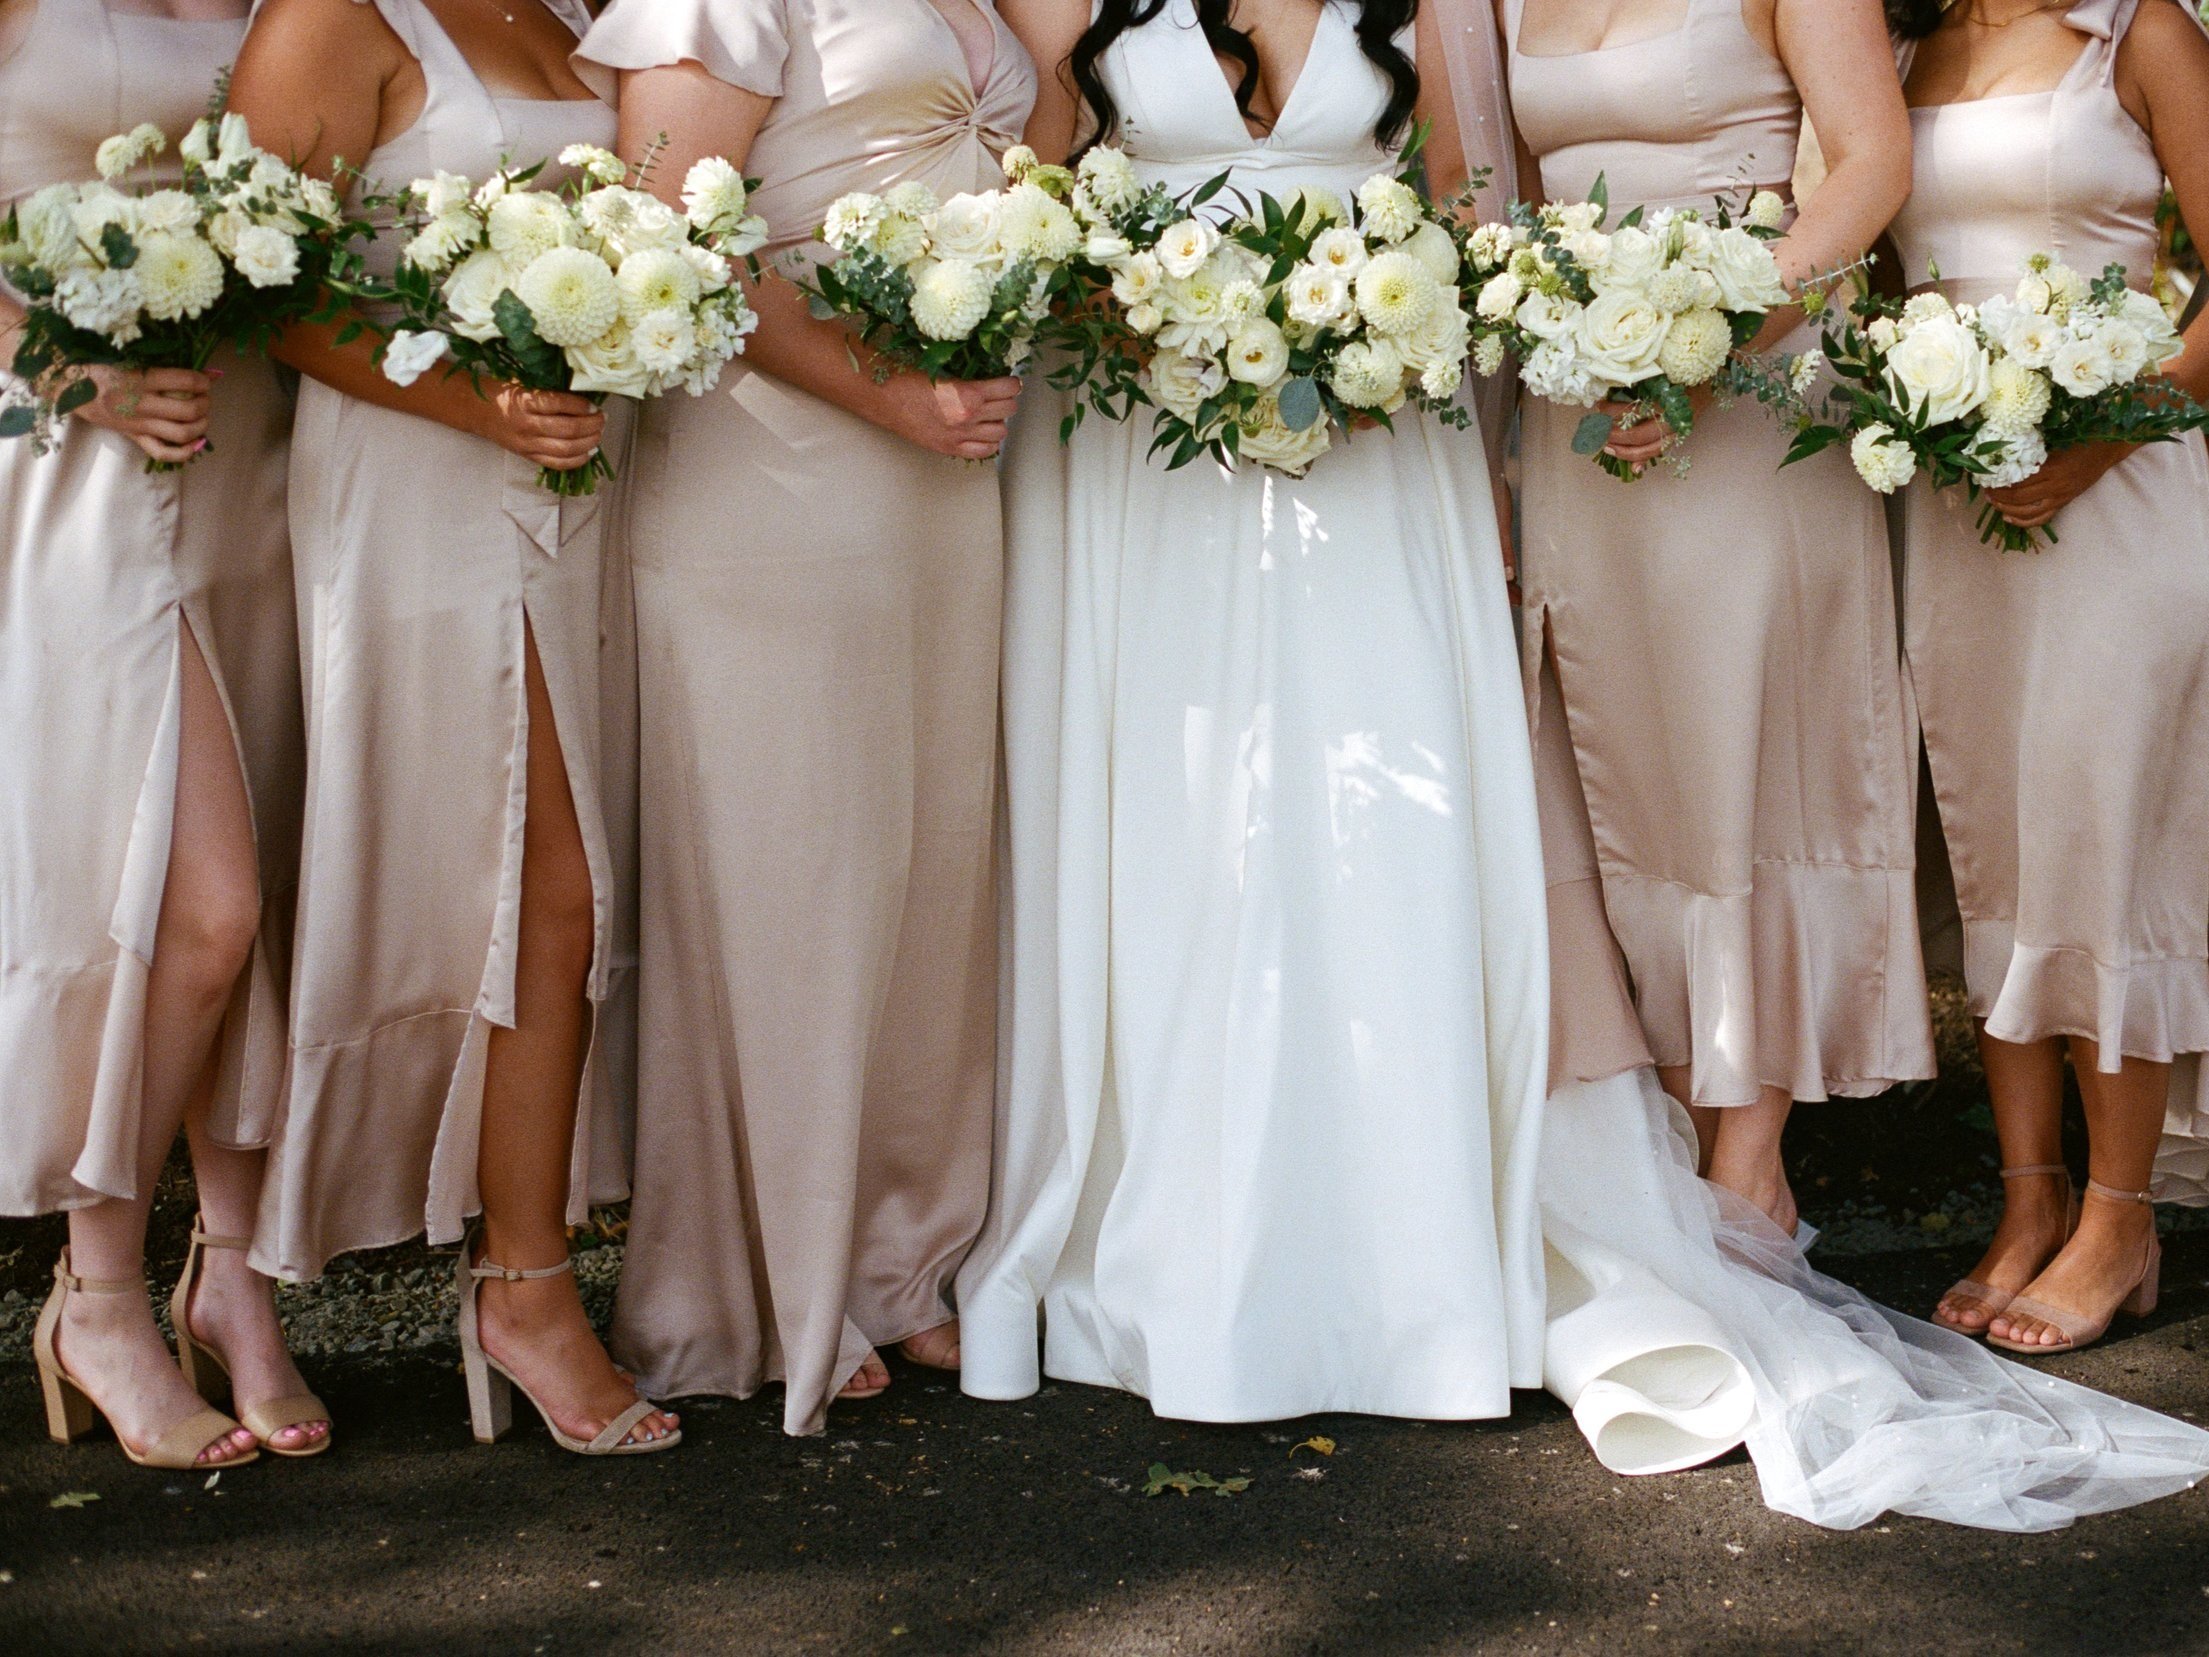 bridesmaids holding wedding bouquets of flowers for wedding photoshoot. Film photographer in Oregon